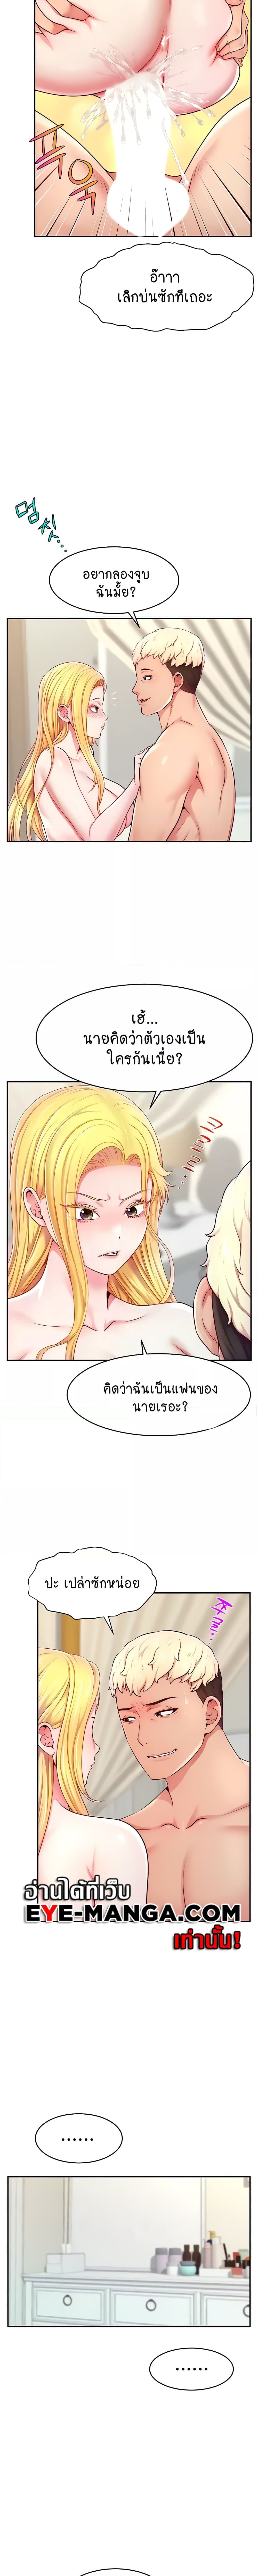 Making Friends With Streamers by Hacking! ตอนที่ 6 ภาพ 8